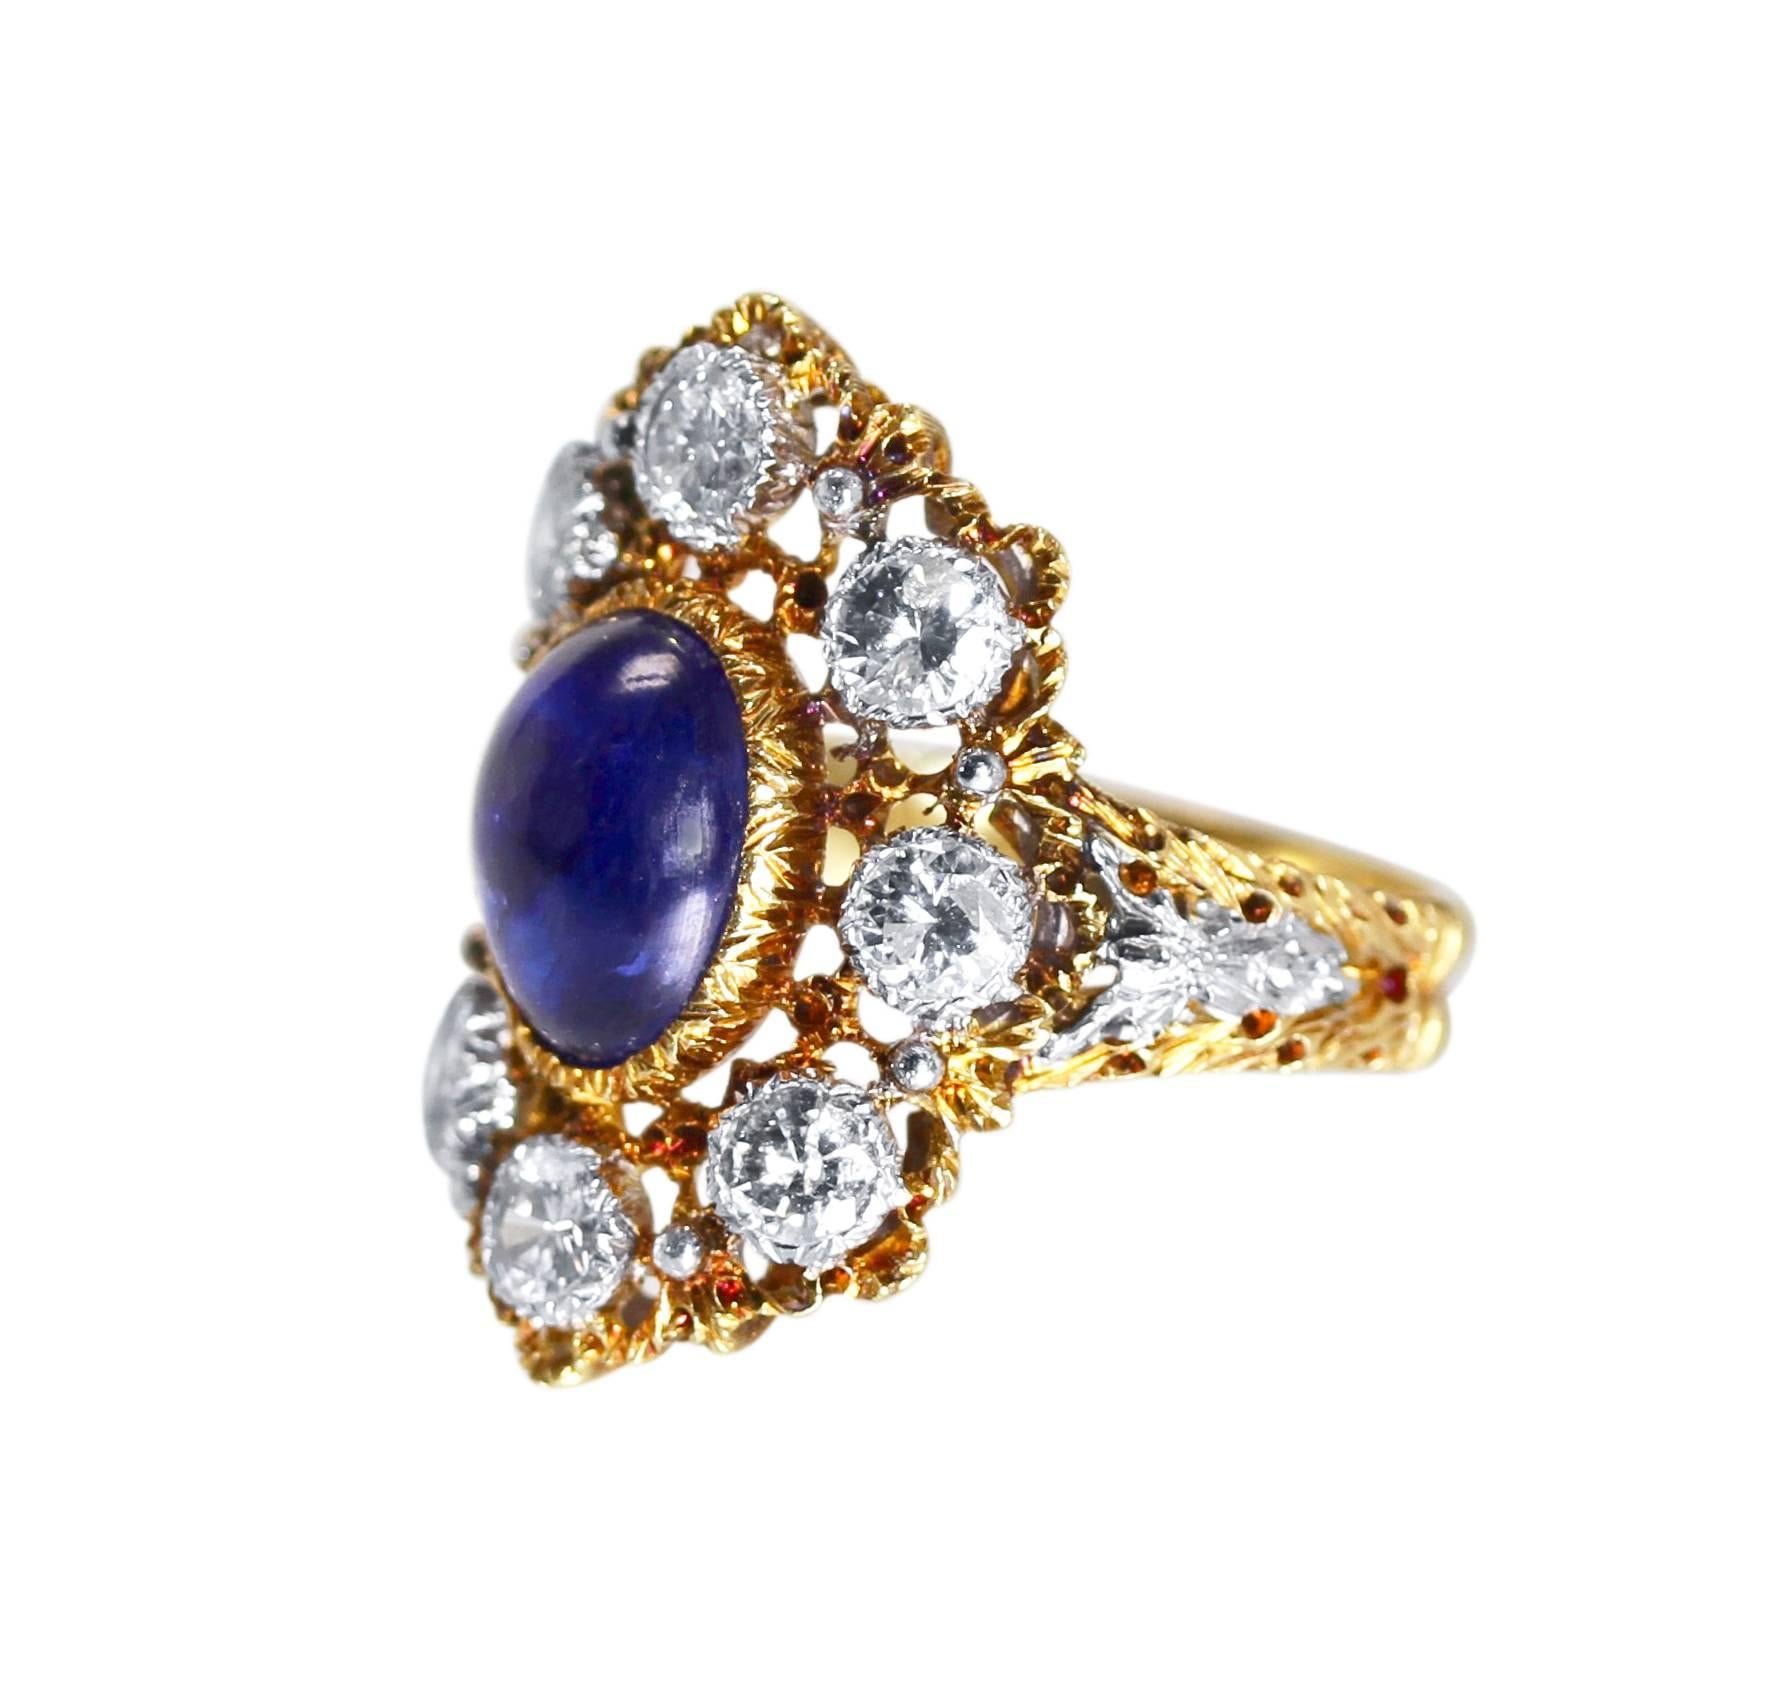 An 18 karat white and yellow gold, sapphire and diamond ring by Buccellati, circa 1950, designed as an elongated floral motif centering a cabochon sapphire weighing approximately 5.50 carats, surrounded by 8 round diamonds weighing approximately